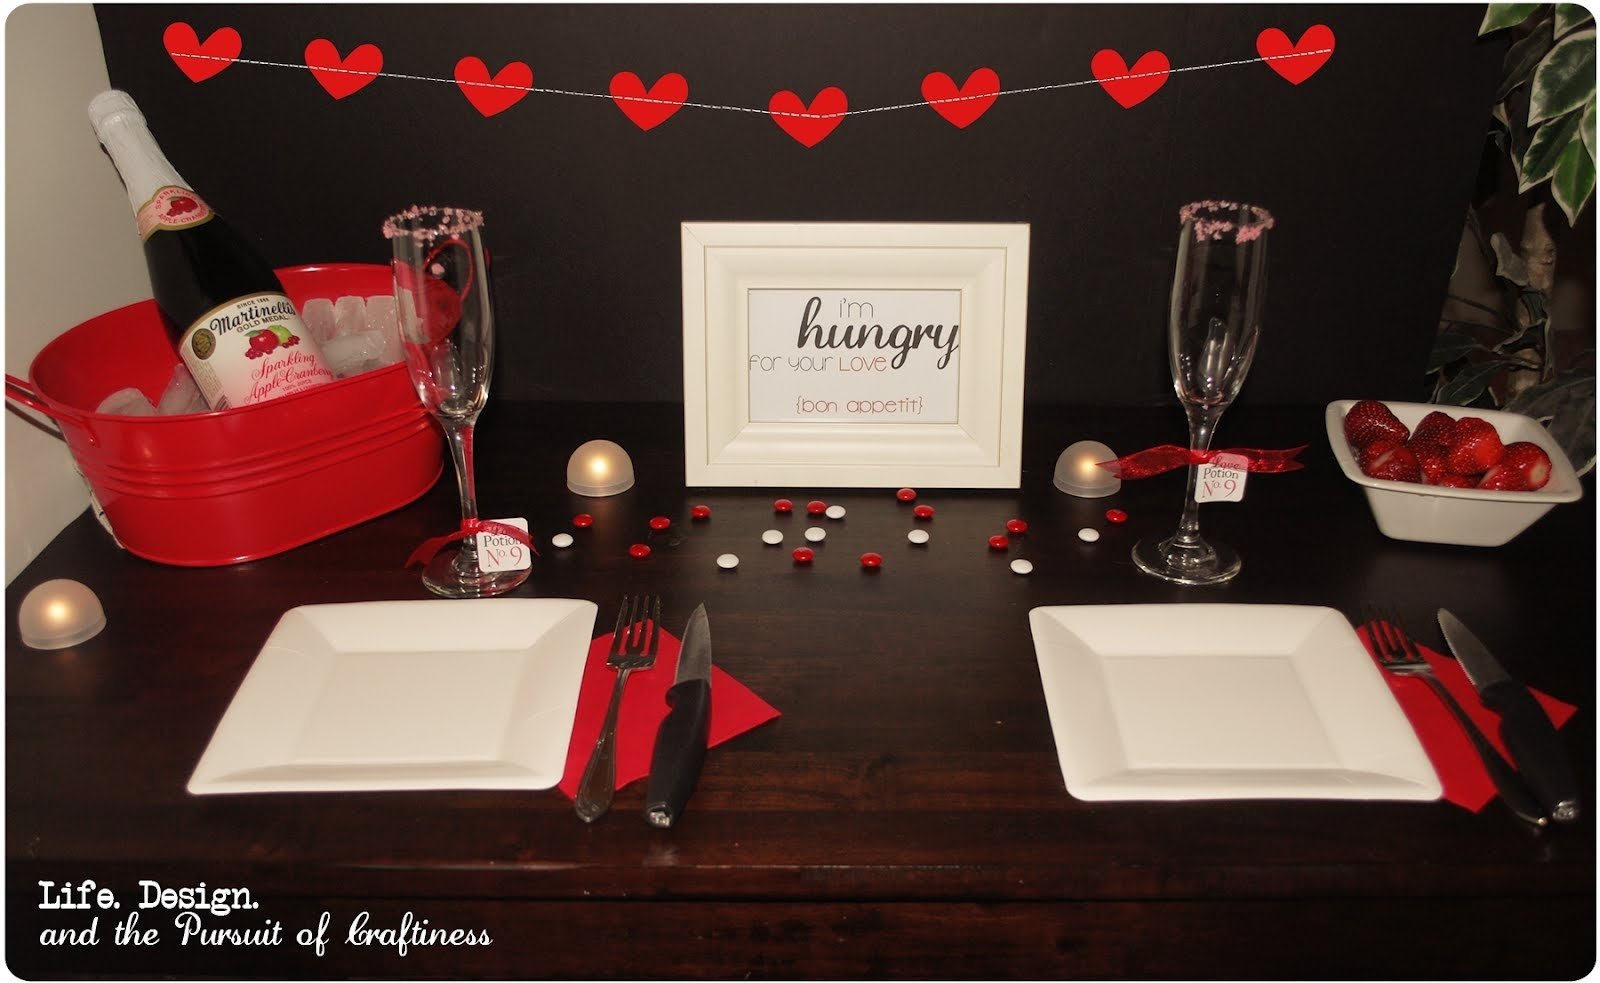 10 Fabulous Ideas For Romantic Night At Home extremely romantic night ideas at home 25 unique indoor picnic 8 2022